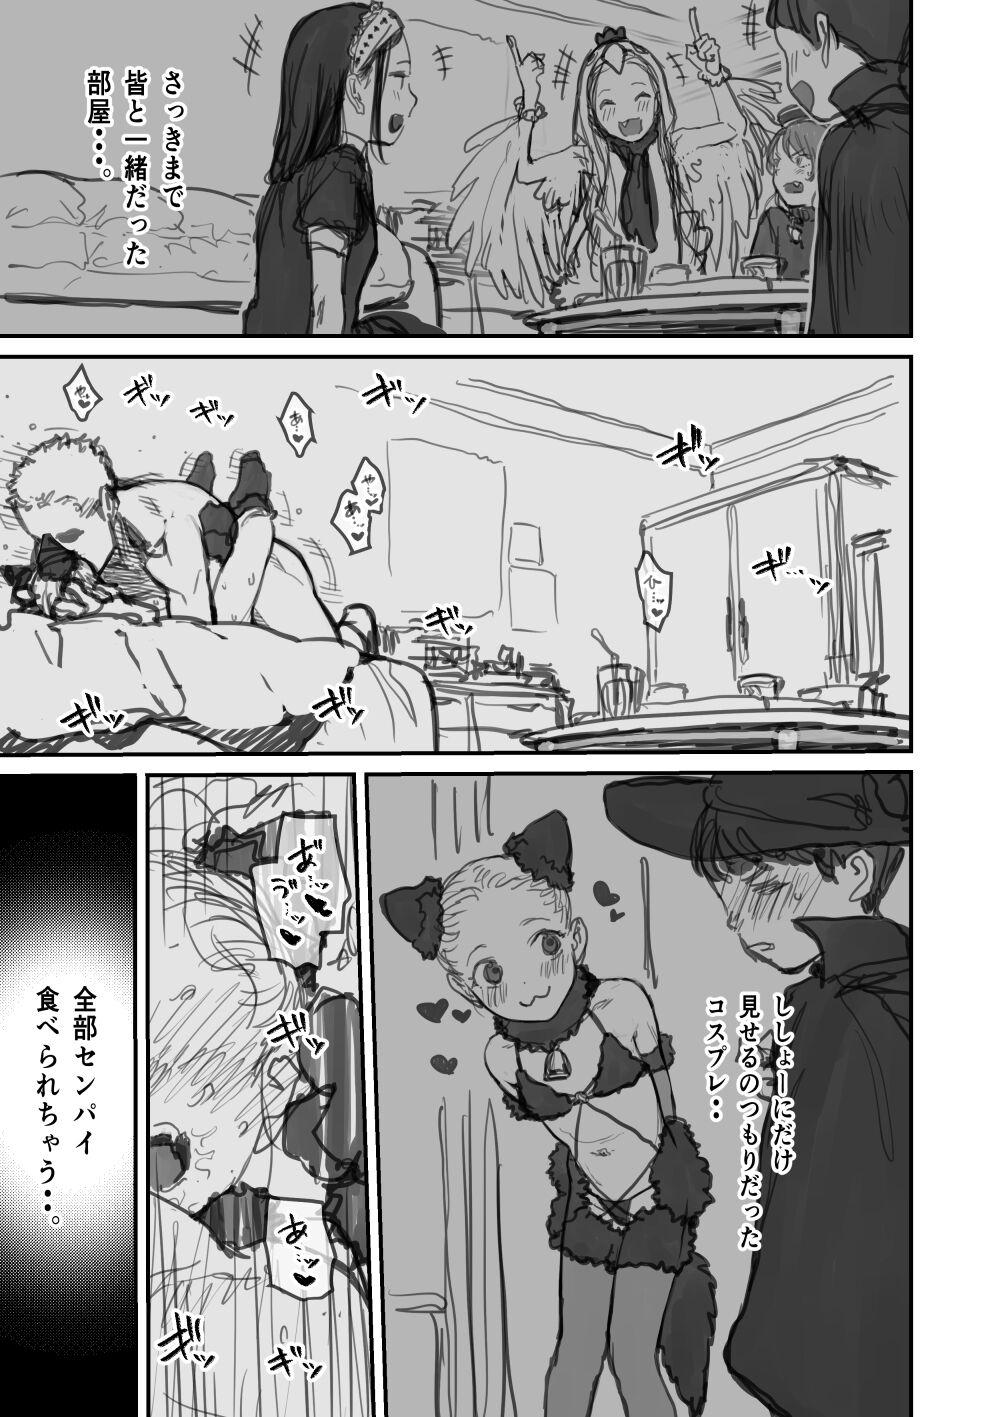 Wives 【?IFルート?】IFIFIFIFIFIFIF【?IFルート?】 Sissy - Page 3